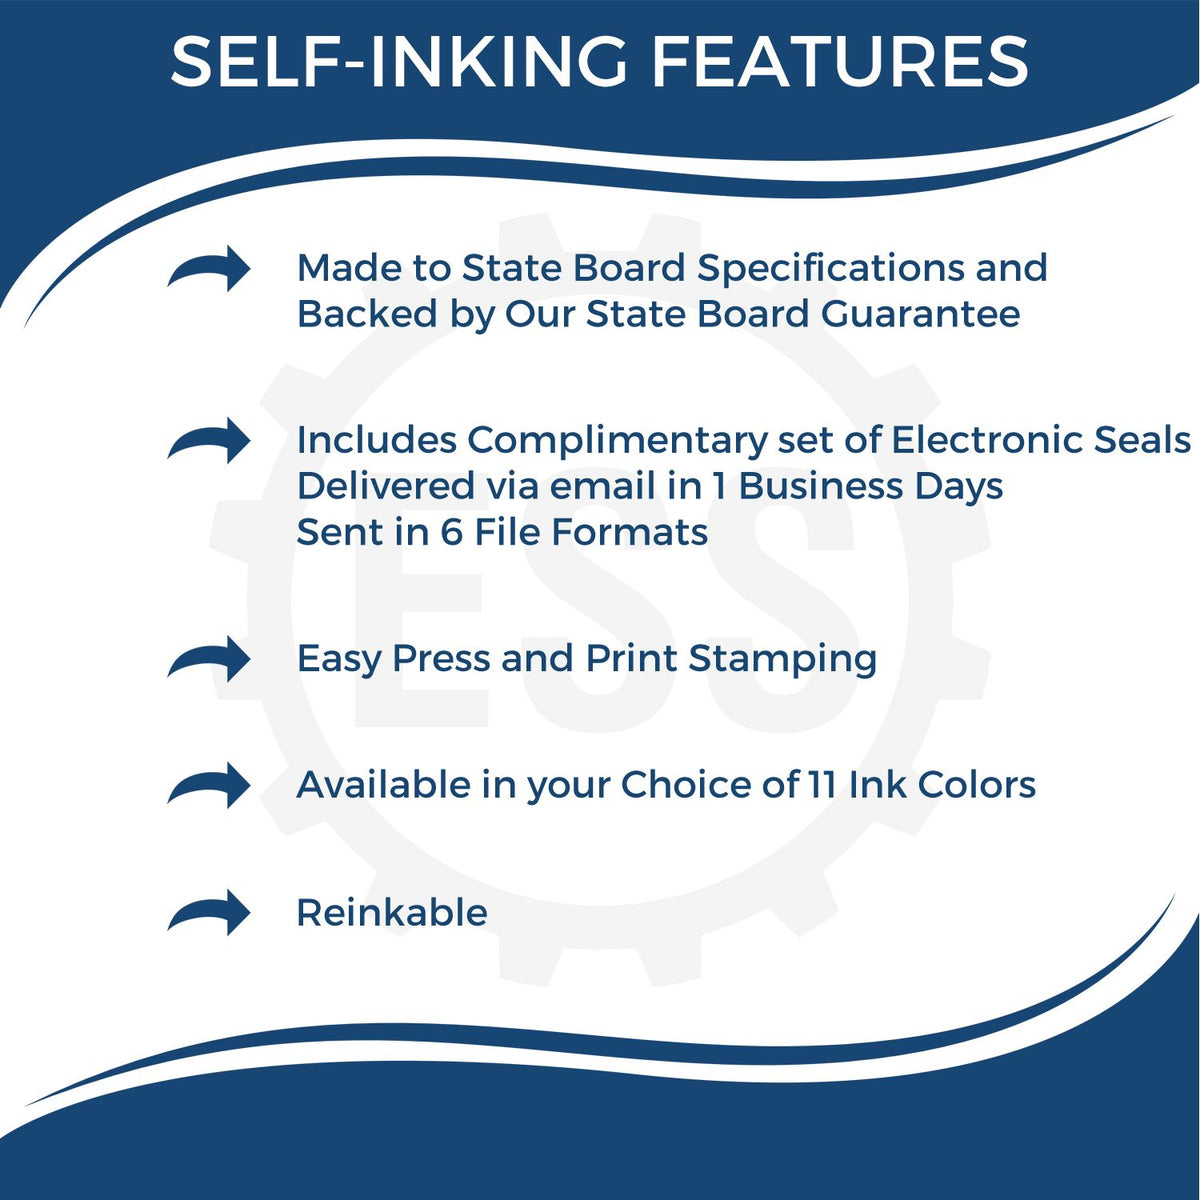 A picture of an infographic highlighting the selling points for the Self-Inking South Dakota Landscape Architect Stamp